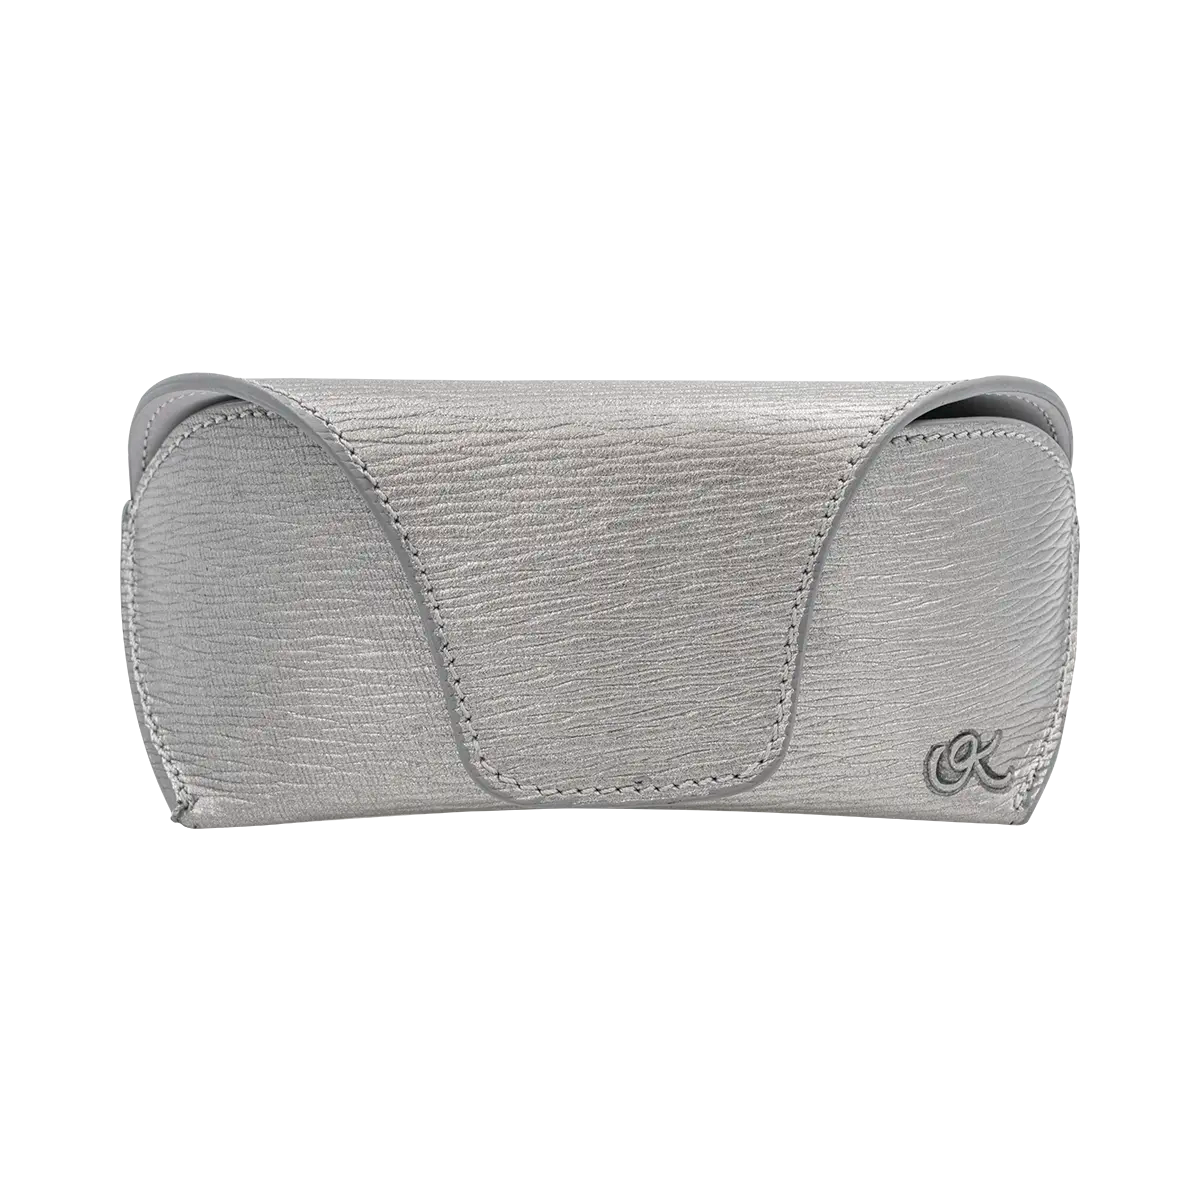 silver leather sunglasses case for women. Shop now in San Diego, CA.